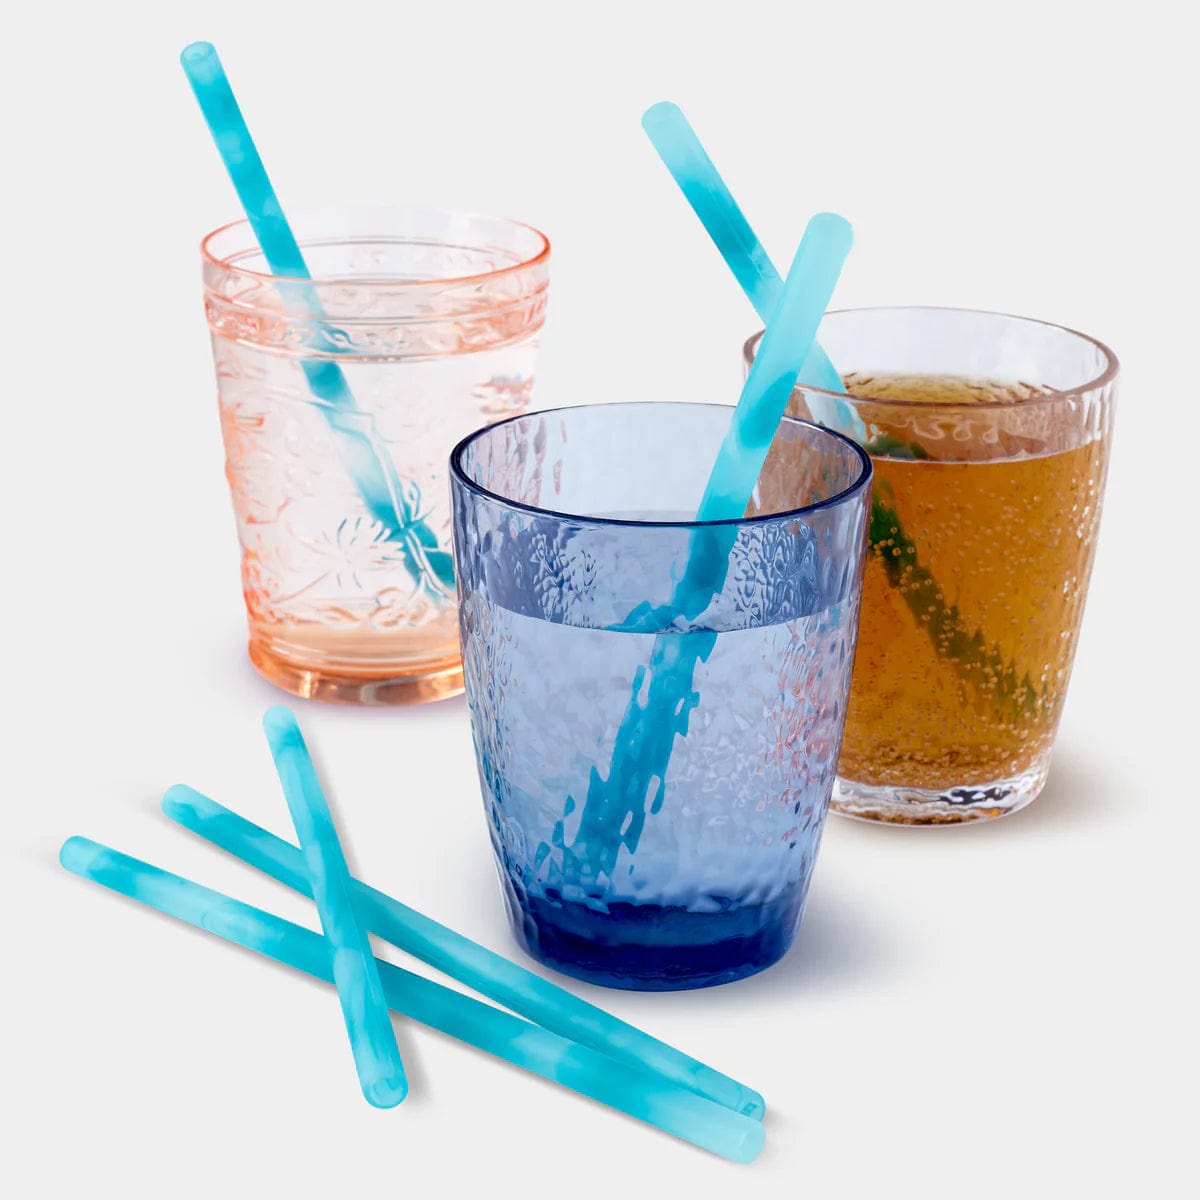 Silikids Reusable Silicone Straws 6-Pack, Cobalt/Berry